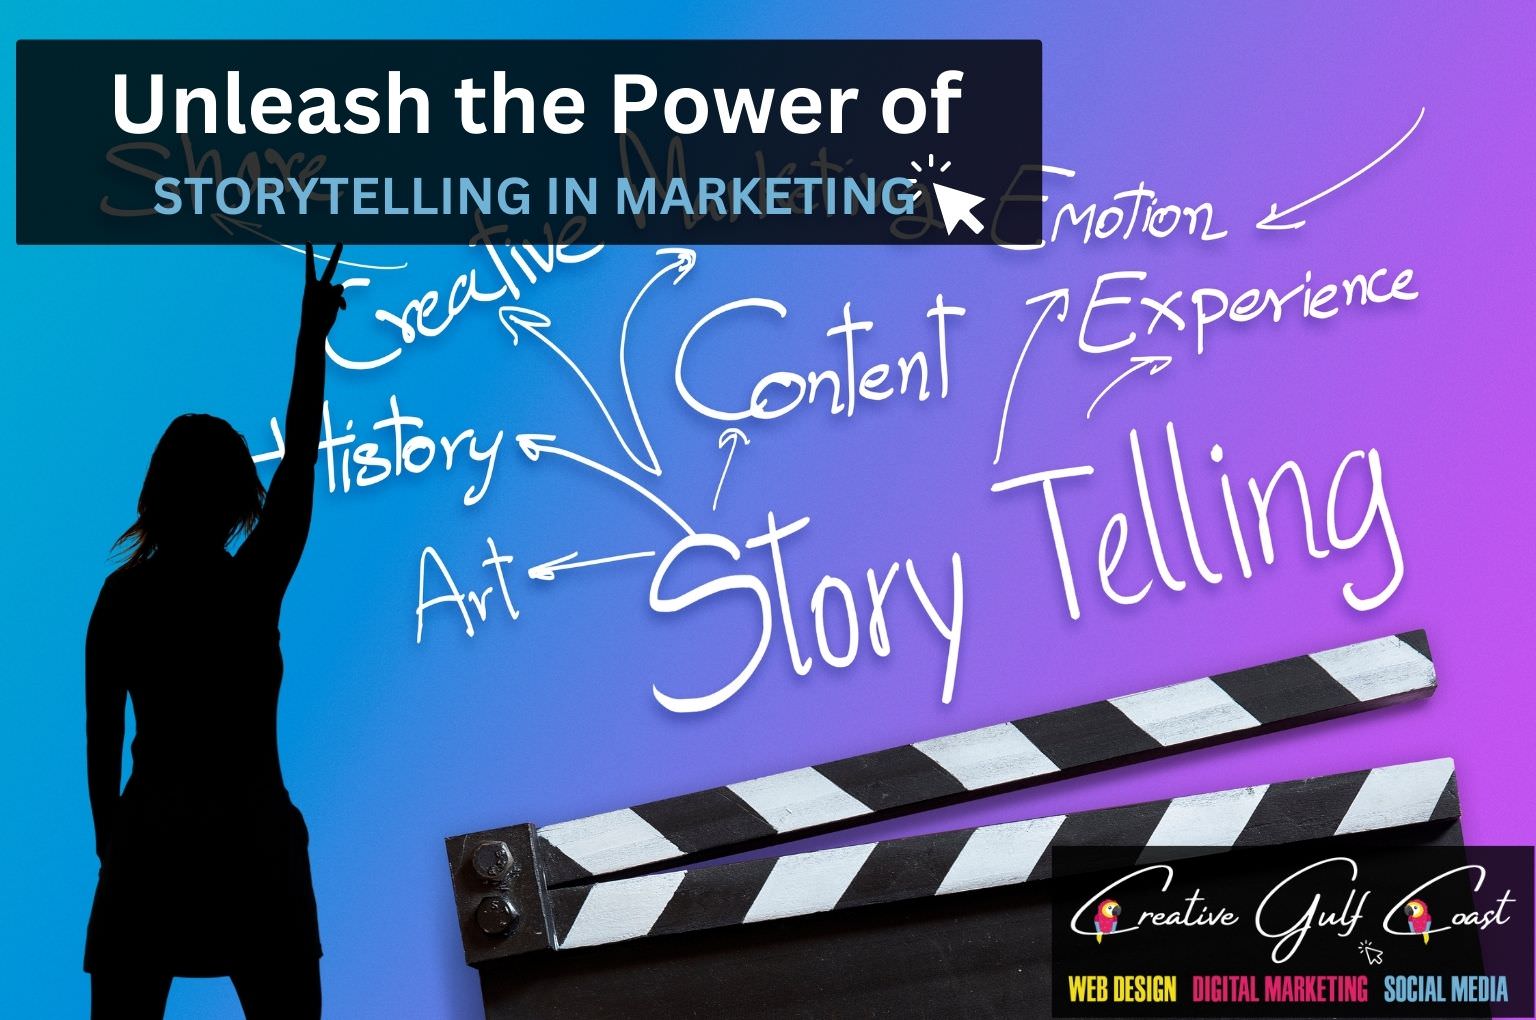 Power of Storytelling in Marketing - Creative Gulf Coast Blog about Digital Marketing, Web Design and SEO in Tampa, Florida